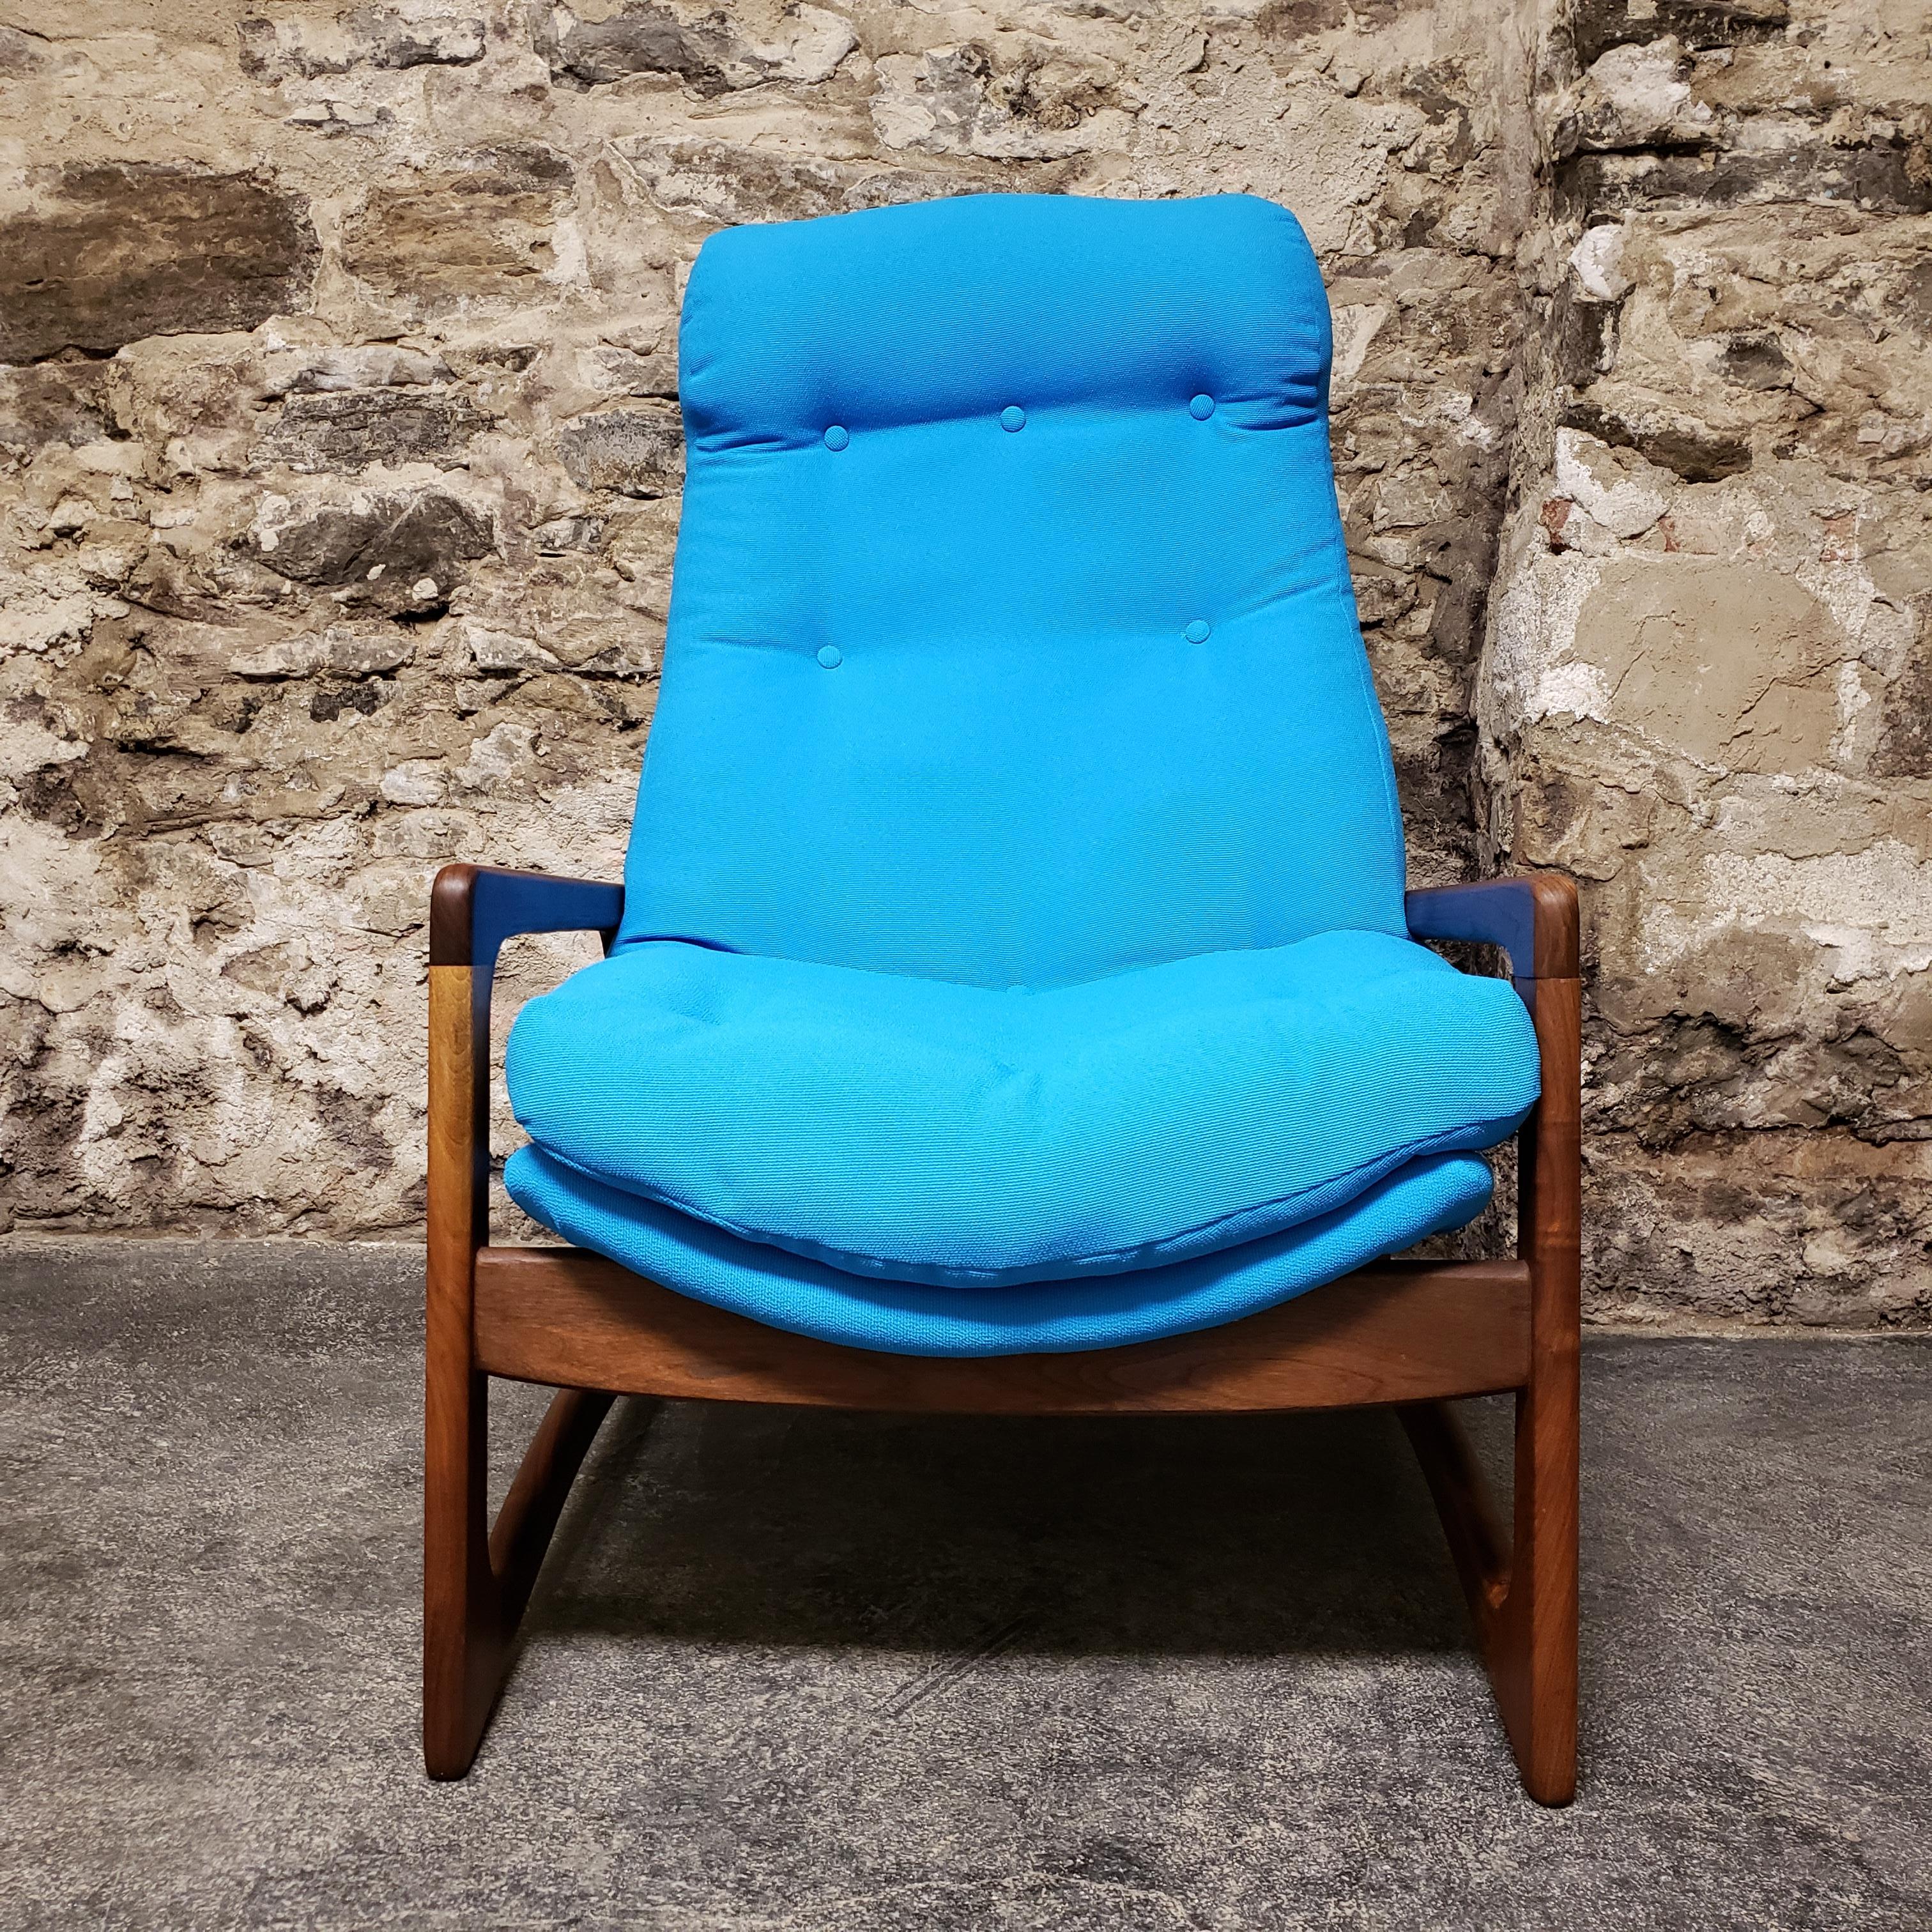 This 1960s Pearsall lounge chair features a gorgeously grained and sculpted biomorphic walnut frame, a quintessential characteristic of legendary, hall of fame designer Adrian Pearsall. The frame is in pristine, refinished condition. It has been